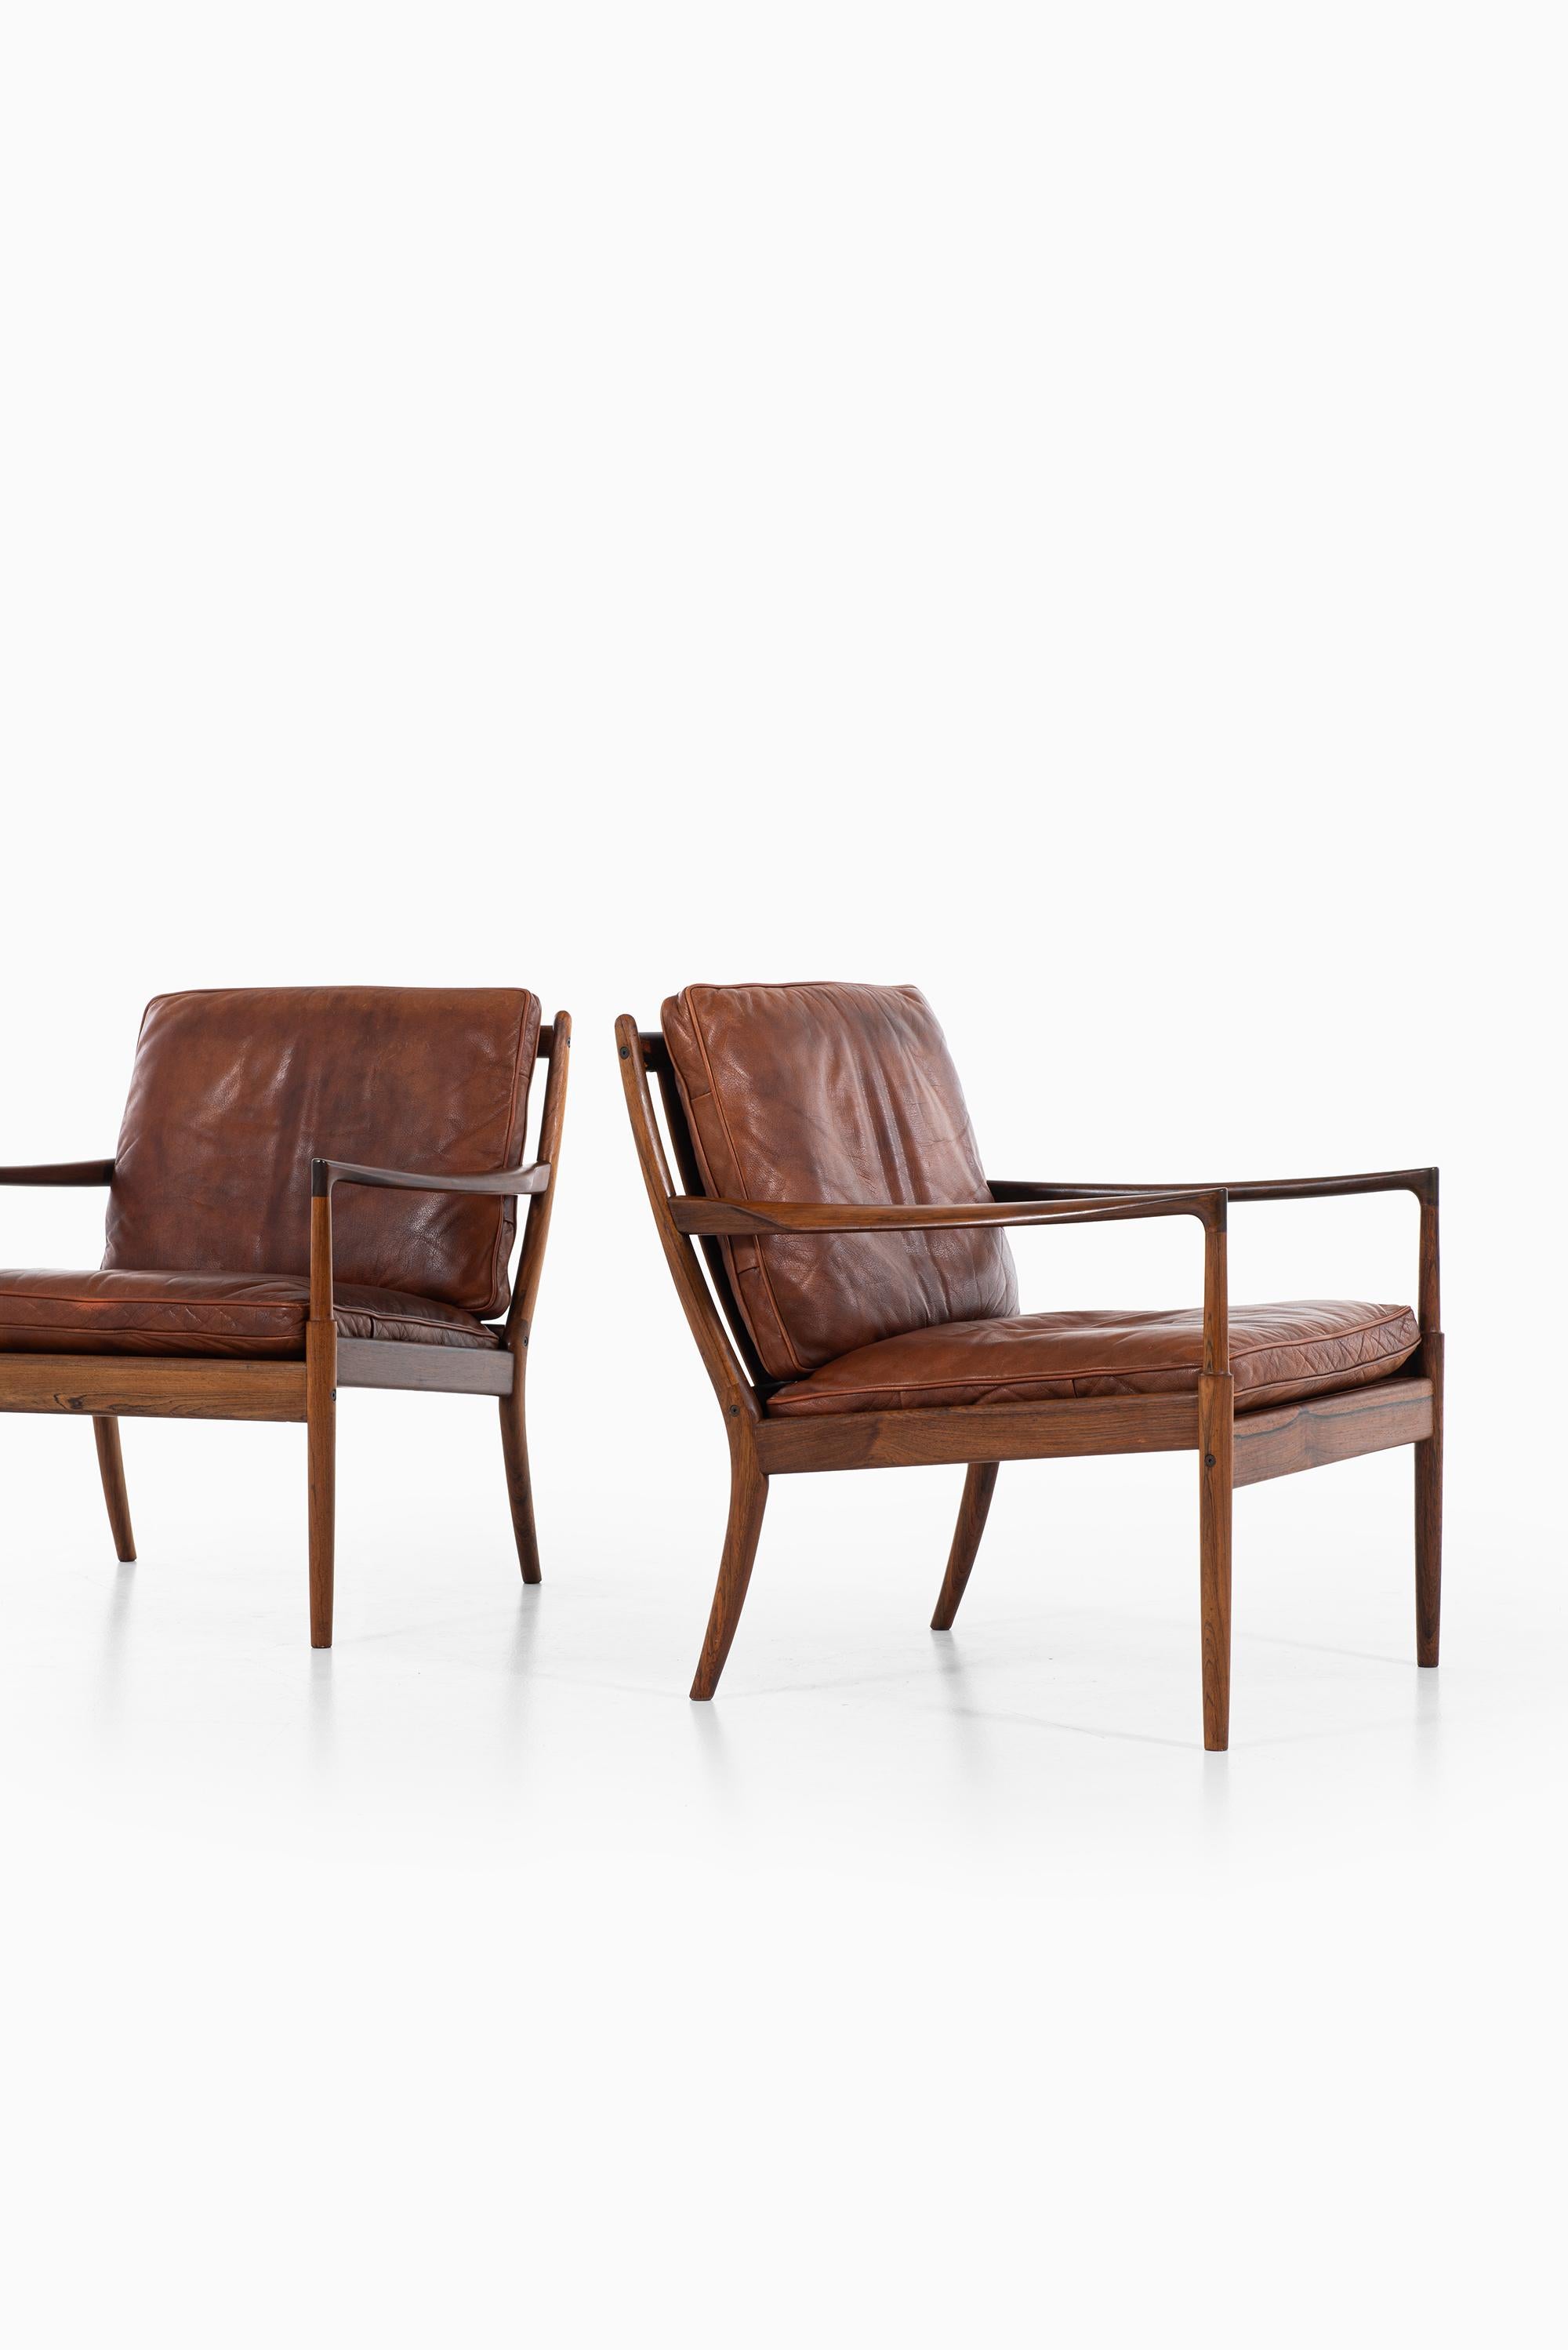 Rare pair of easy chairs model Samsö designed by Ib Kofod-Larsen. Produced by OPE in Sweden.